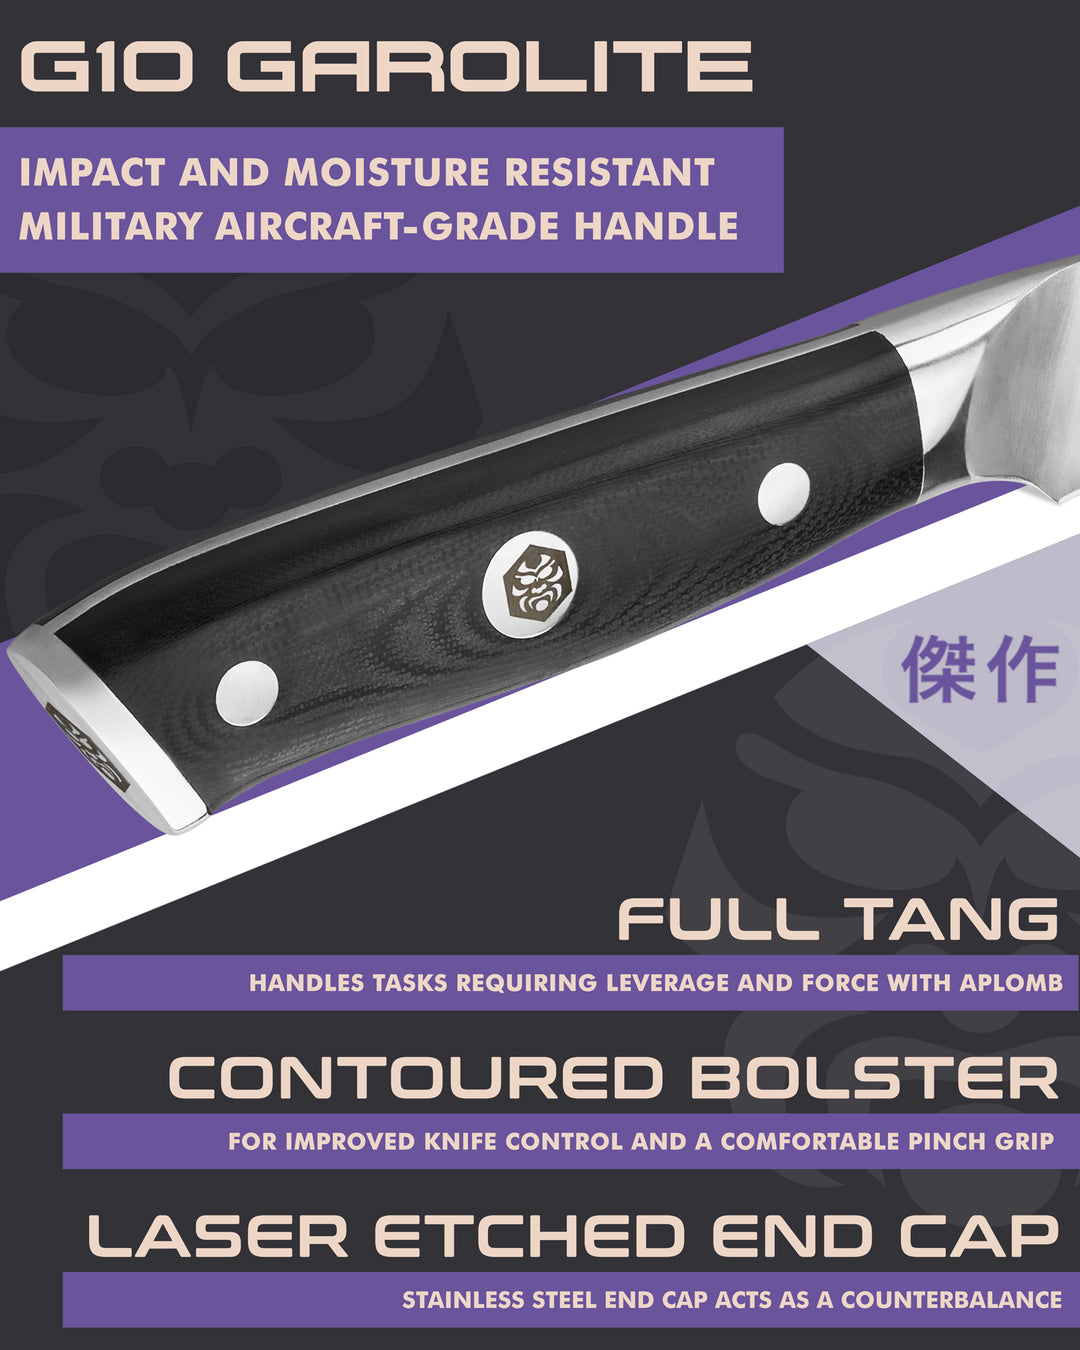 Kessaku Dynasty Carving Knife handle features: G10 handle, full tang, contoured bolster, laser etched end cap